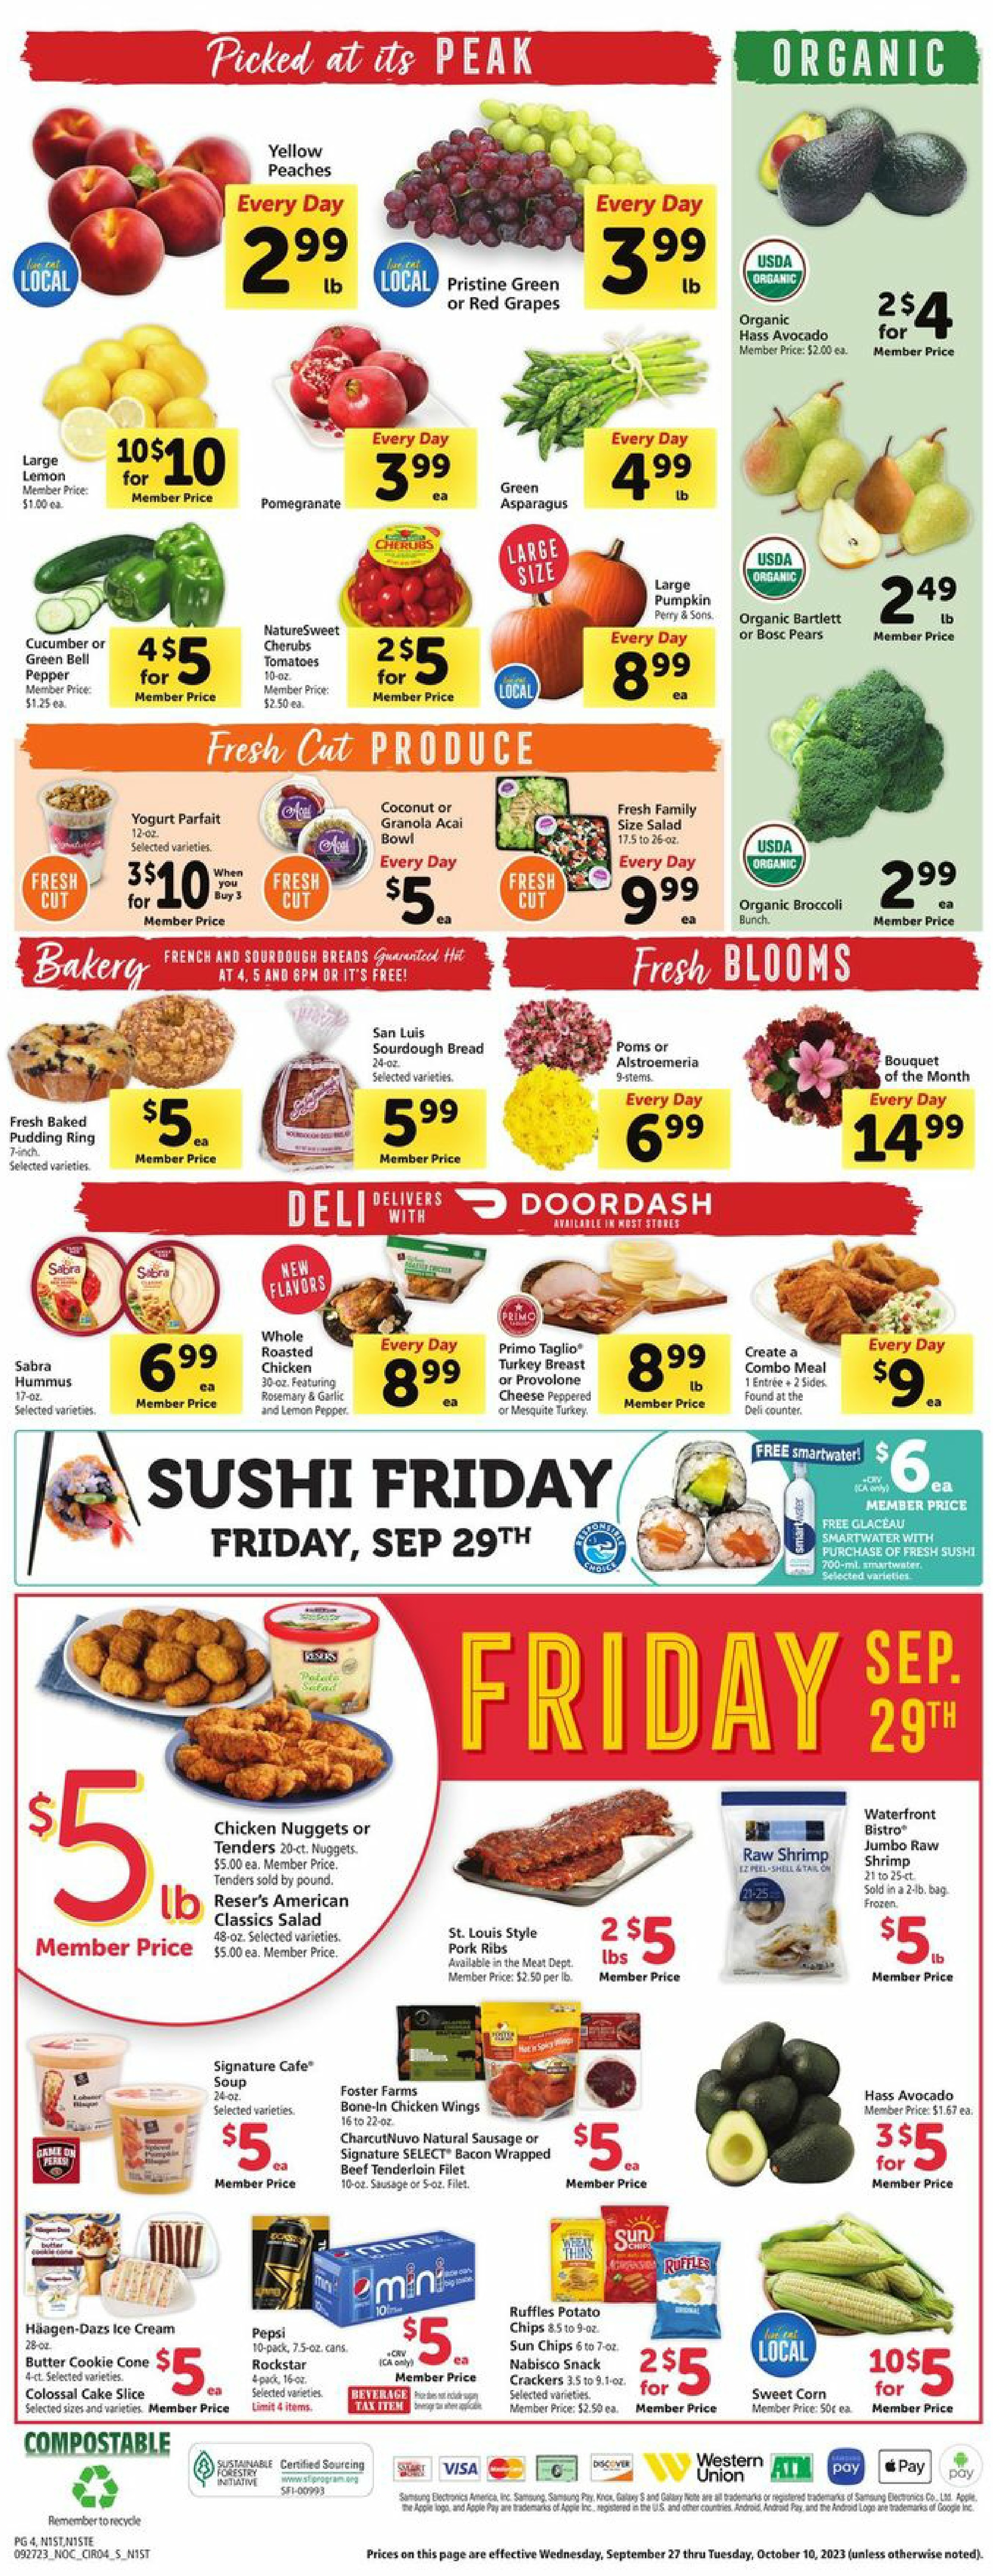 Safeway Weekly Ad Preview: (October 4 - October 10 2023)